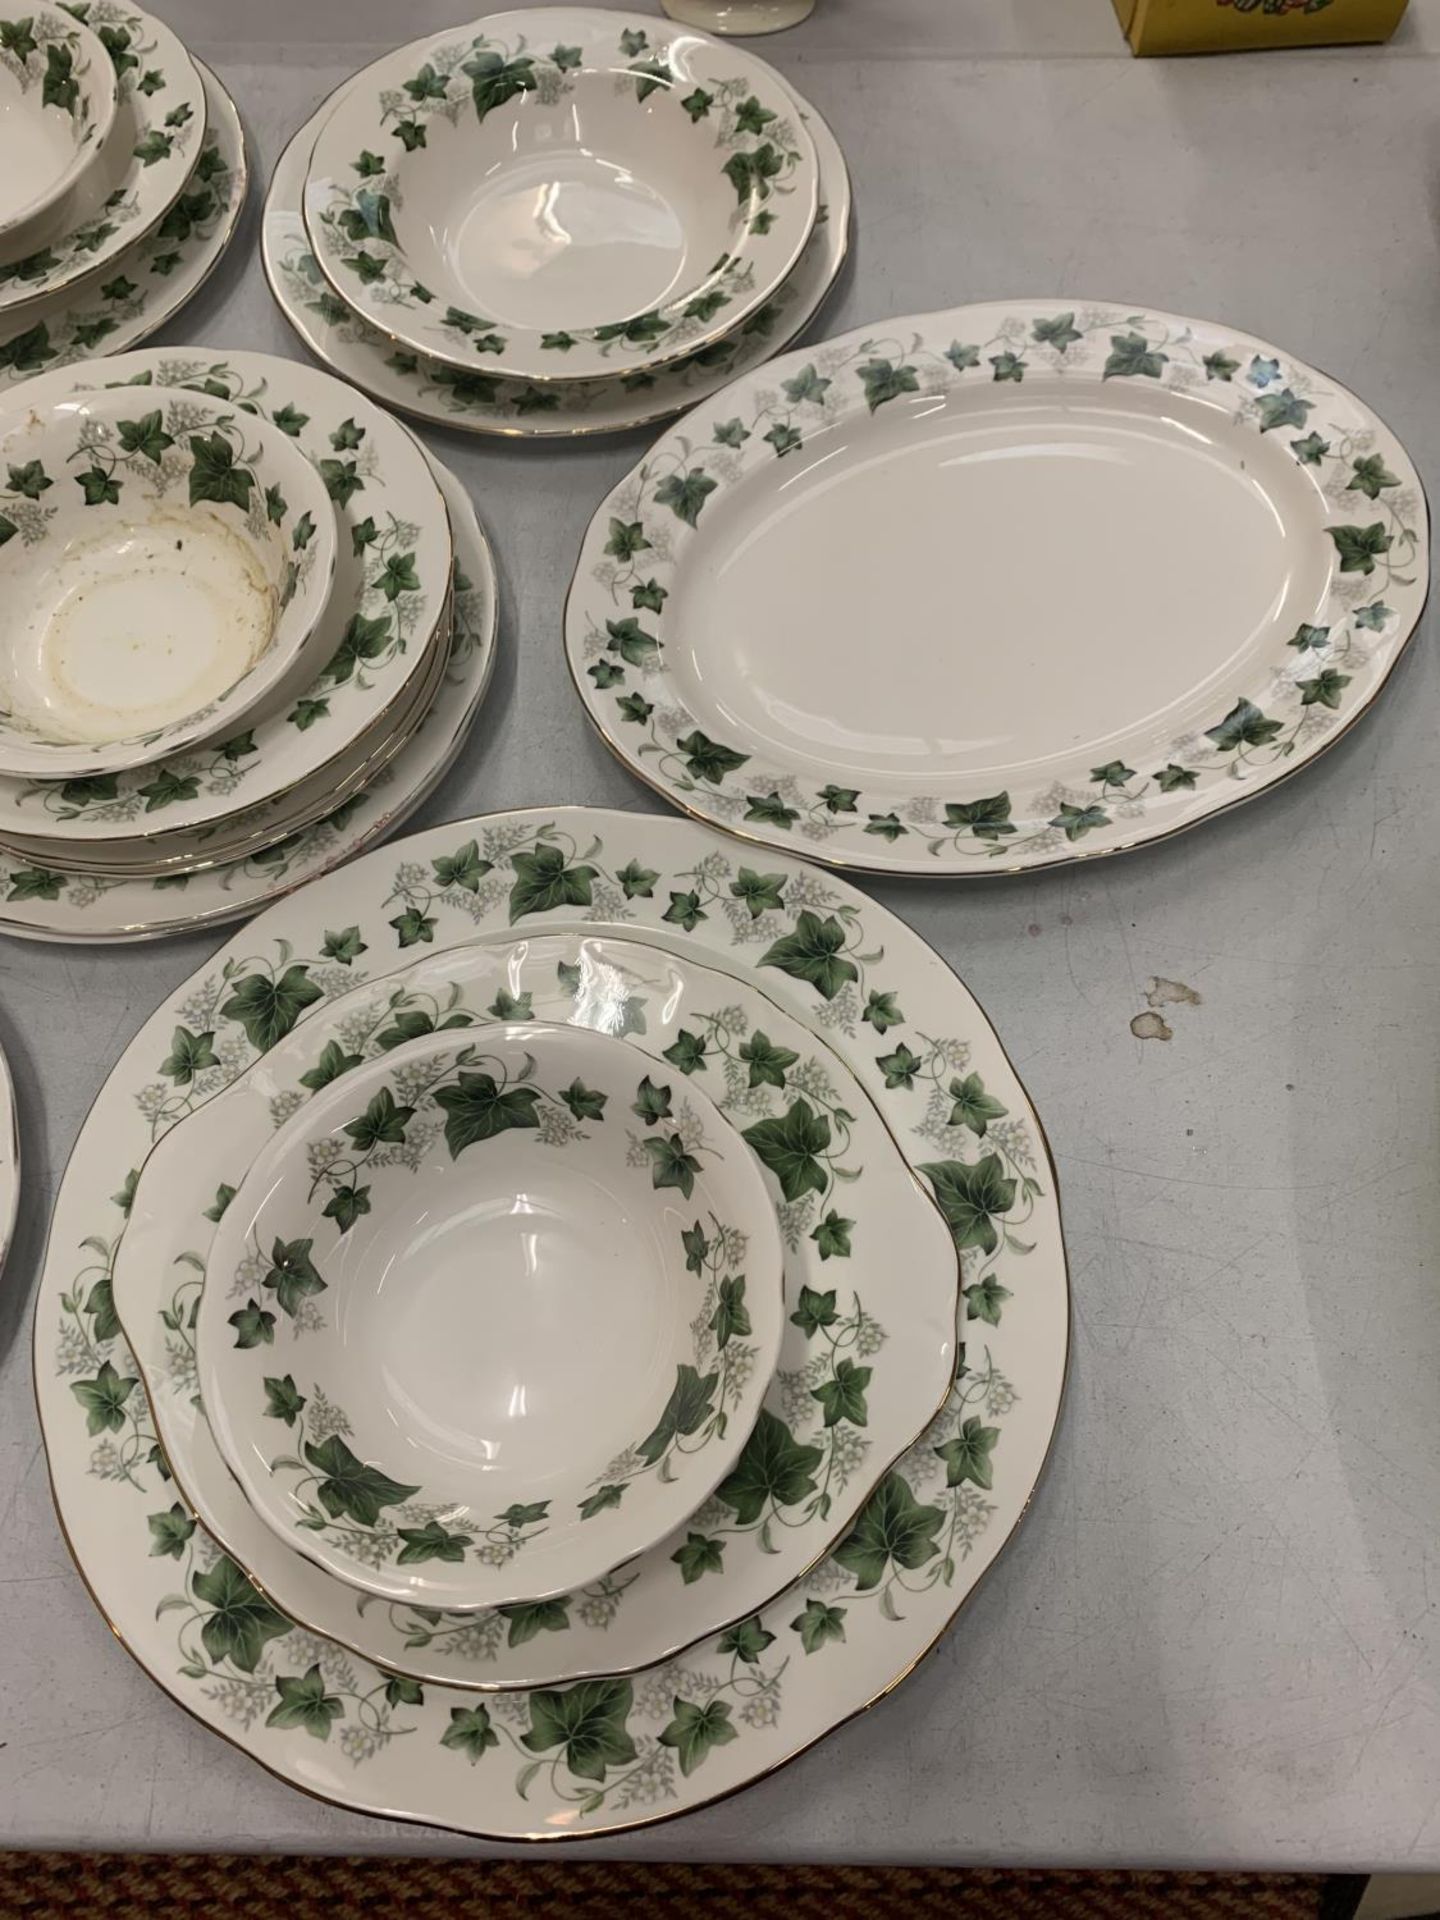 A LARGE COLLECTION OF DUCHESS FINE BONE CHINA 'IVY' TABLEWARE TO INCLUDE CUPS, SAUCERS, EGG CUPS, - Image 2 of 6